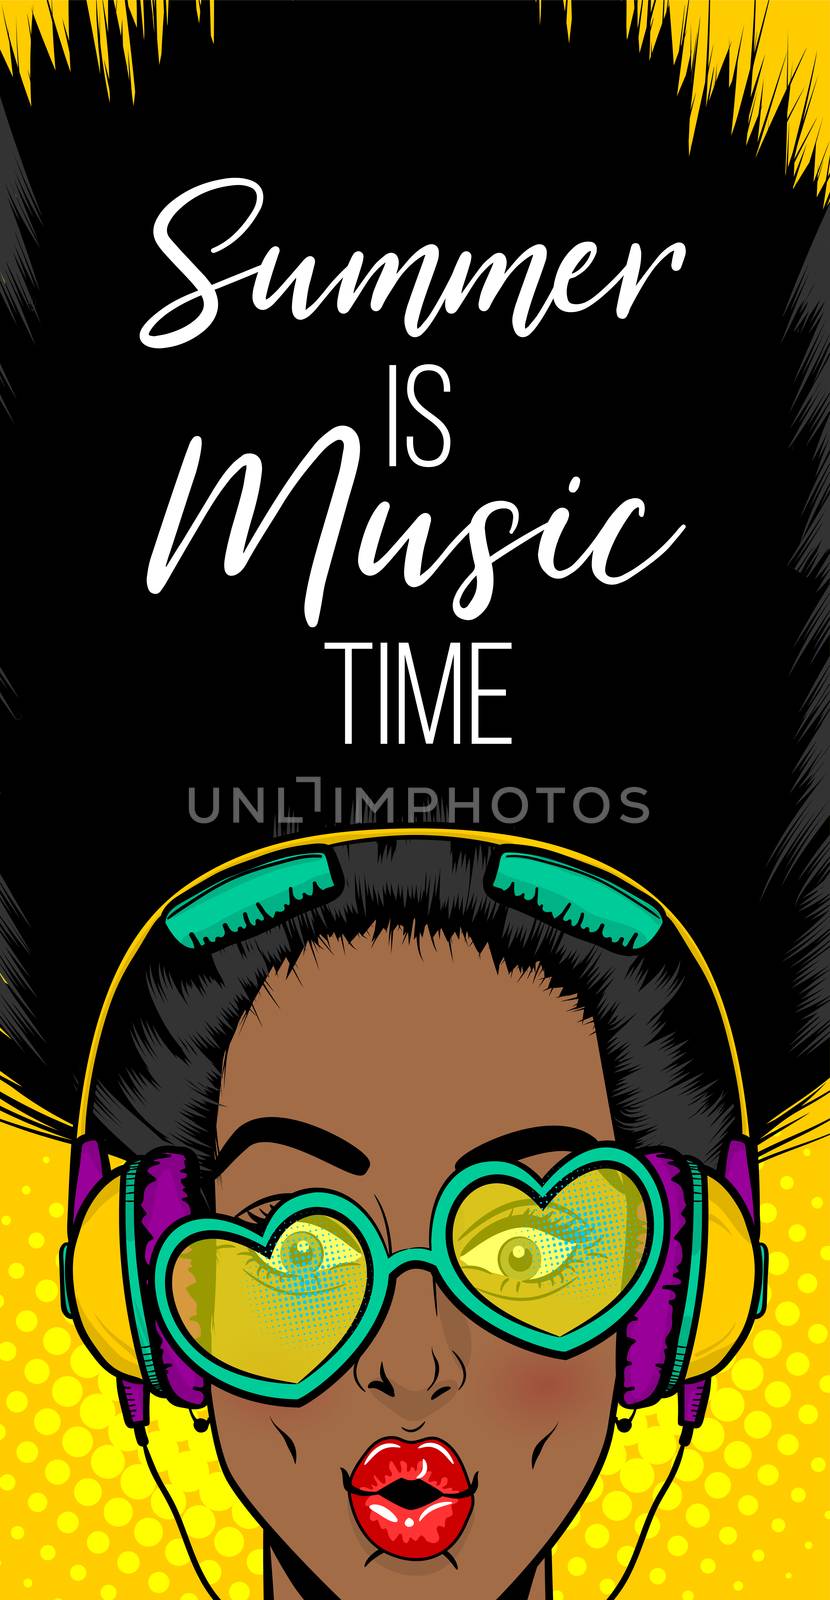 Black woman in sunglasses earphones. Wow face pop art style beautiful. Shocked face vintage girl. Disco music banner. Vintage poster WOW SALE kitsch advertise. Summer party love music phrase.